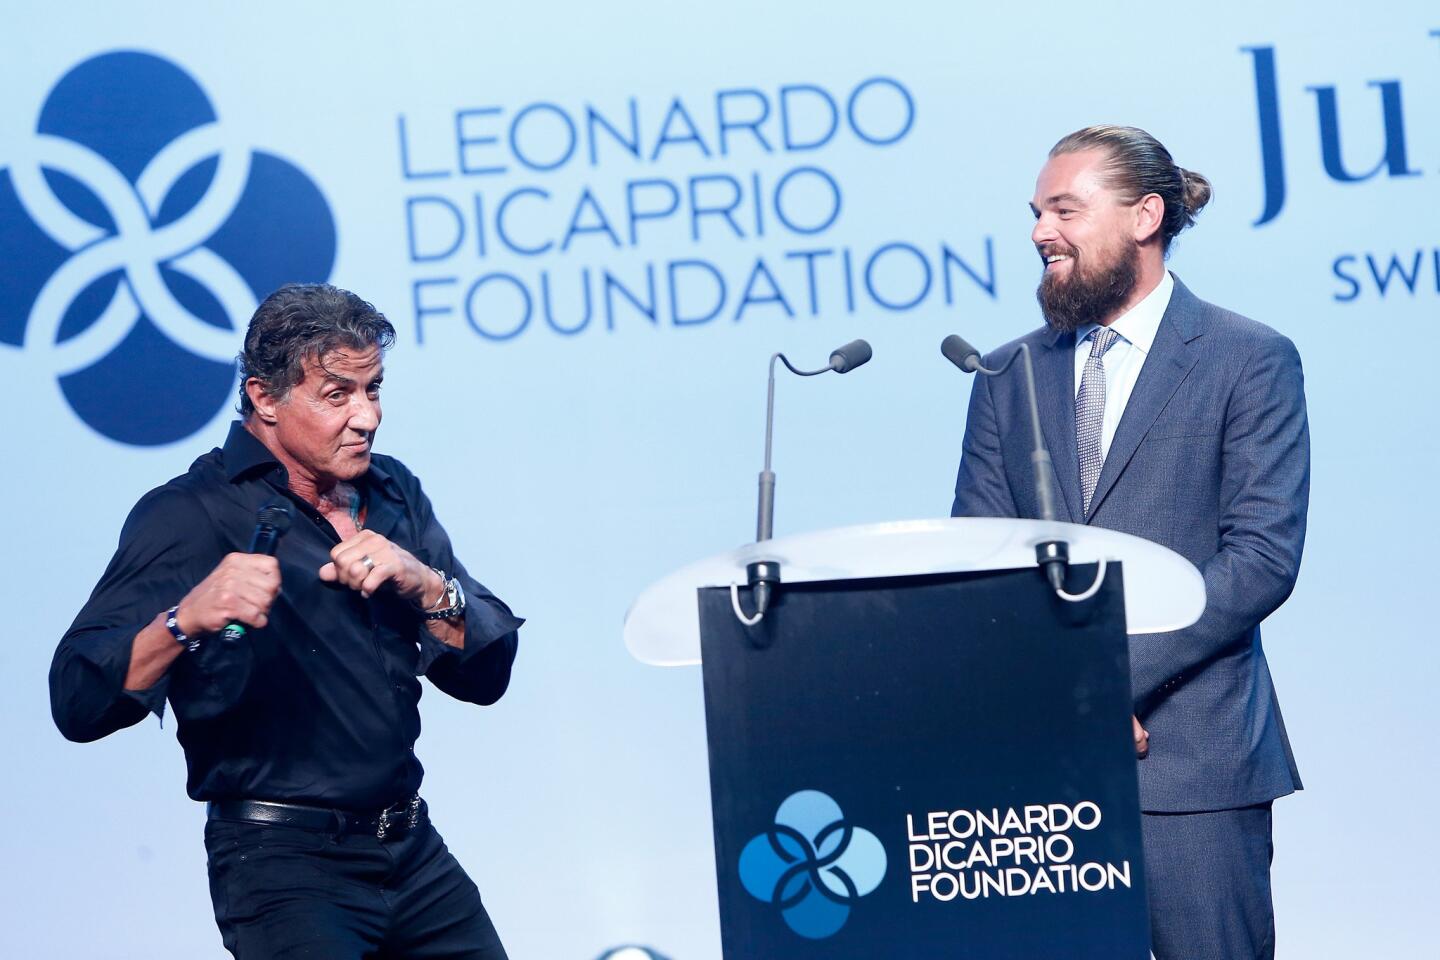 Actors Sylvester Stallone and Leonardo DiCaprio speak onstage during the Leonardo DiCaprio Foundation's gala at Domaine Bertaud Belieu in Saint Tropez, France, on July 22, 2015.